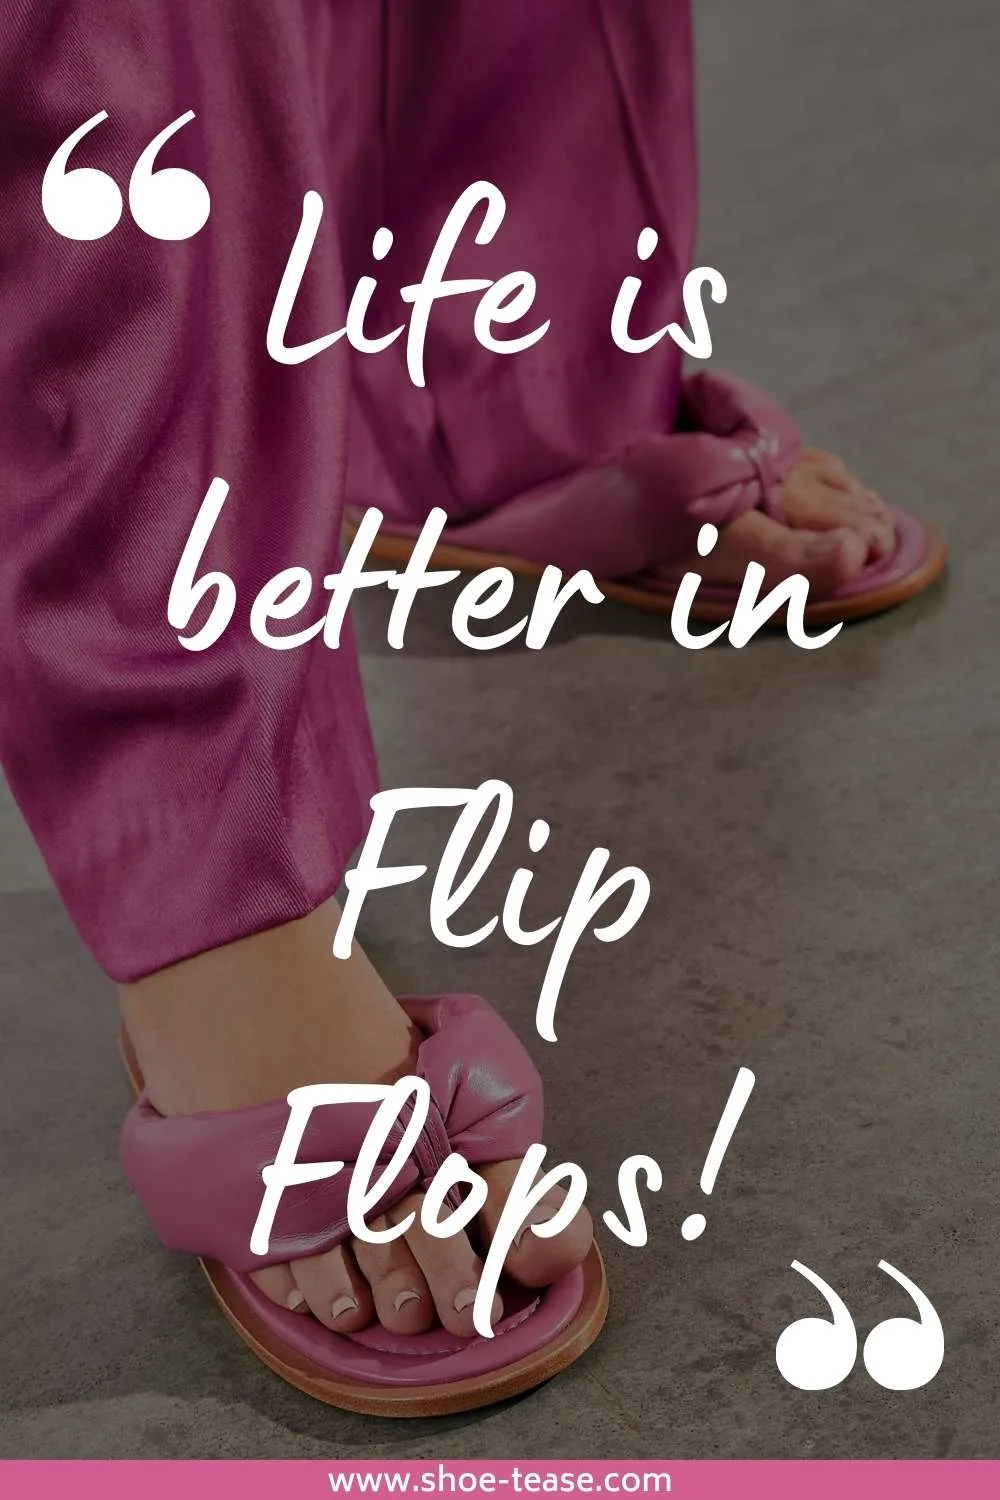 Flip flop quote reading life is better in flip flops over image of woman's feet wearing pink flip flops and pants.